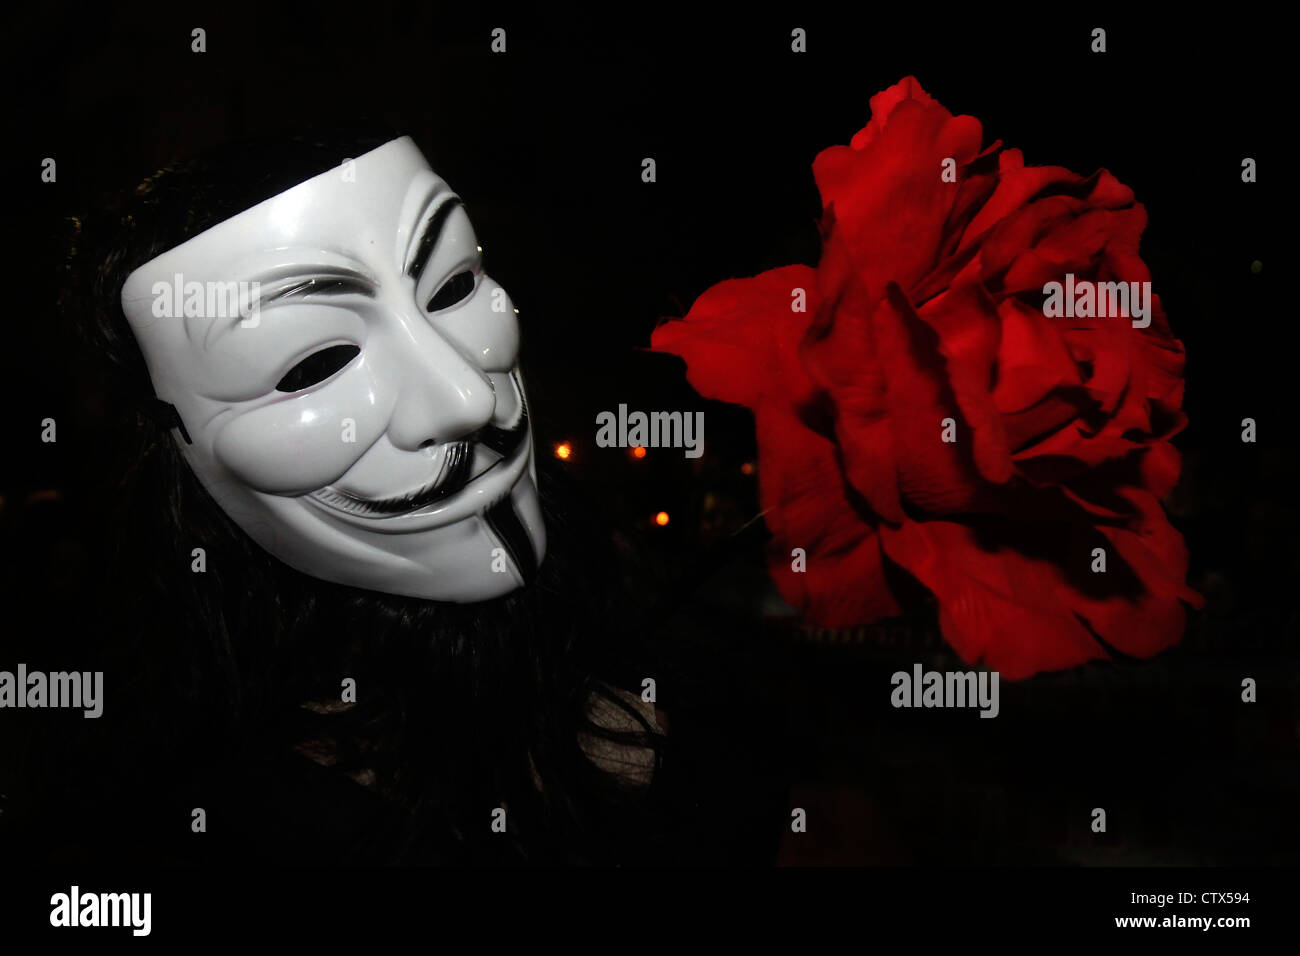 A member of the group Anonymous wearing Guy Fawkes mask during Cost of Living protest in Tel Aviv Israel. The Guy Fawkes mask is a well-known symbol for the online hacktivist group Anonymous used in anti-government and anti-establishment protests around the world. Stock Photo